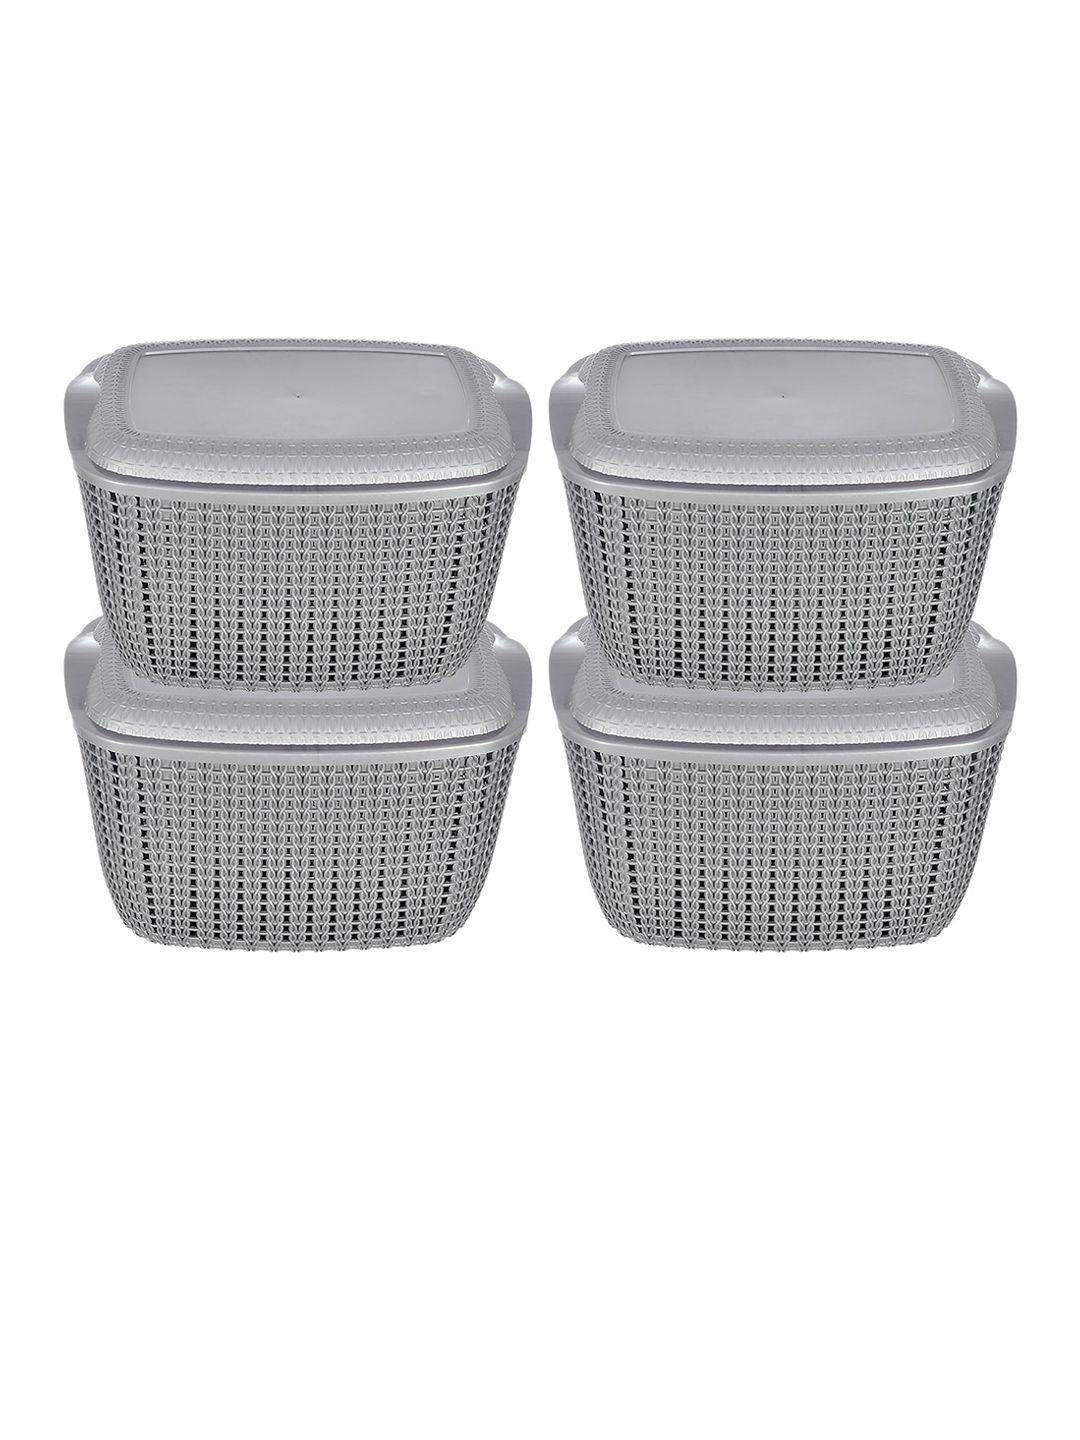 Kuber Industries Set Of 4 Multipurposes Plastic Basket With Lids Price in India